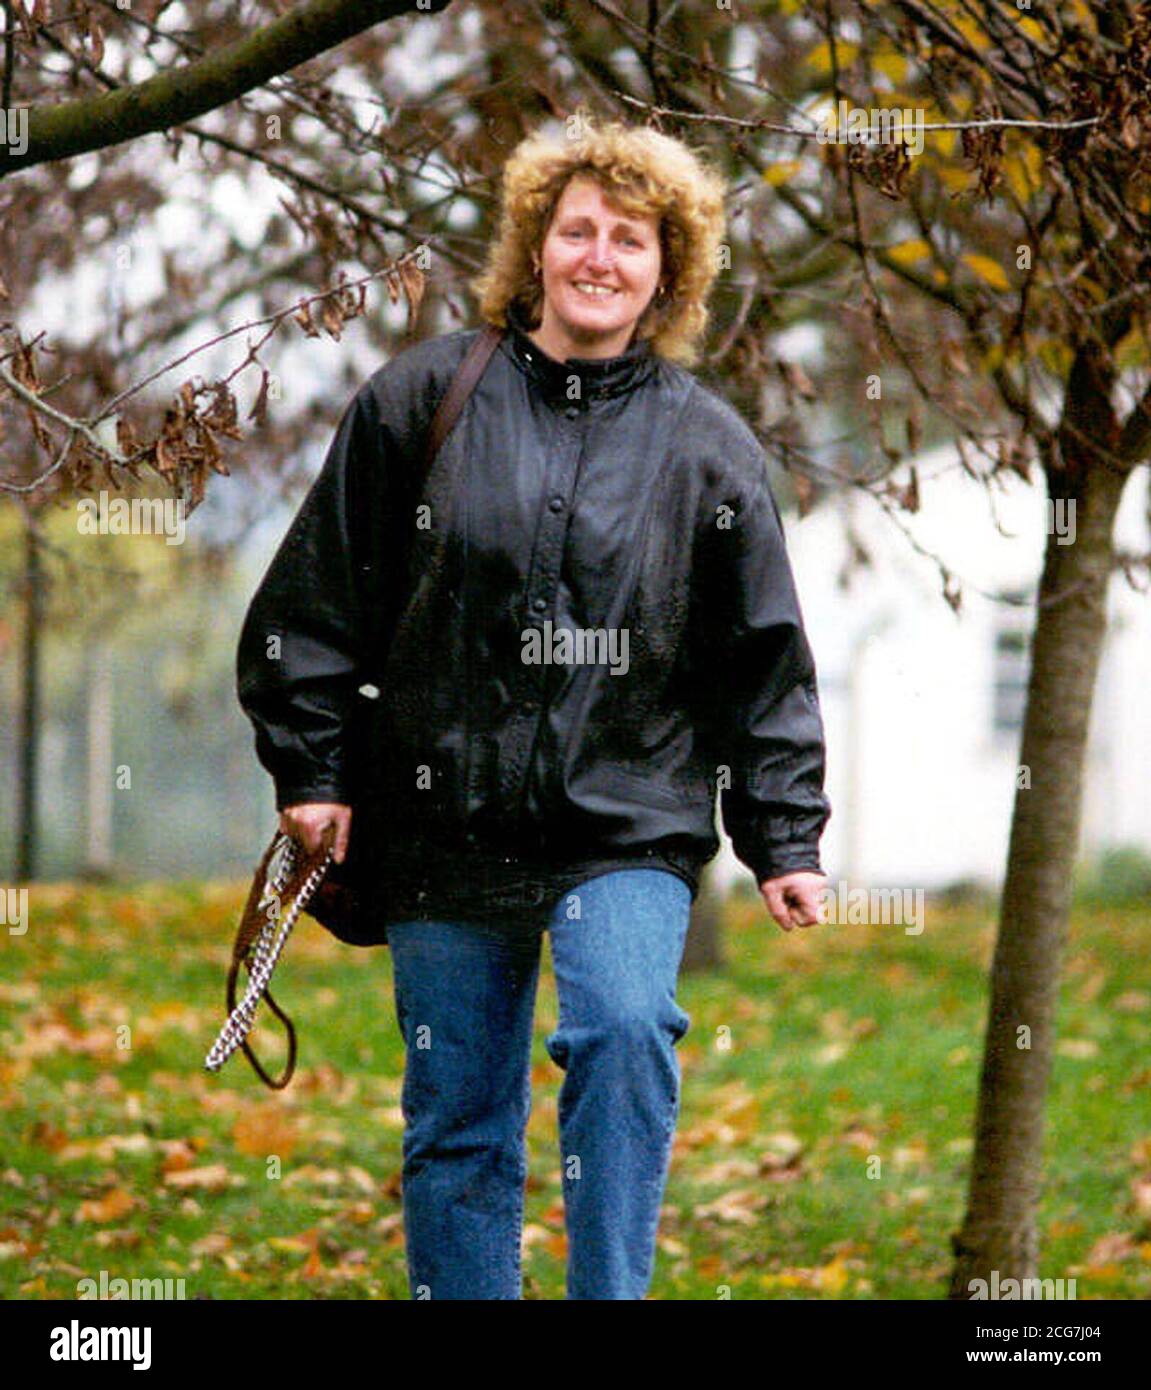 Undated Police collect image of Landlady Carol Evans from Peterborough who was allegedly beaten to death by her lodger Peter Airey, 27, who buried her body under a pile of tools in the garden shed before selling her prized collection of country and western music.  *... Northampton Crown Court heard. Airey denies murdering Carol Evans but admitted seven counts of theft, one of forgery and two of obtaining property by deception.  Stock Photo